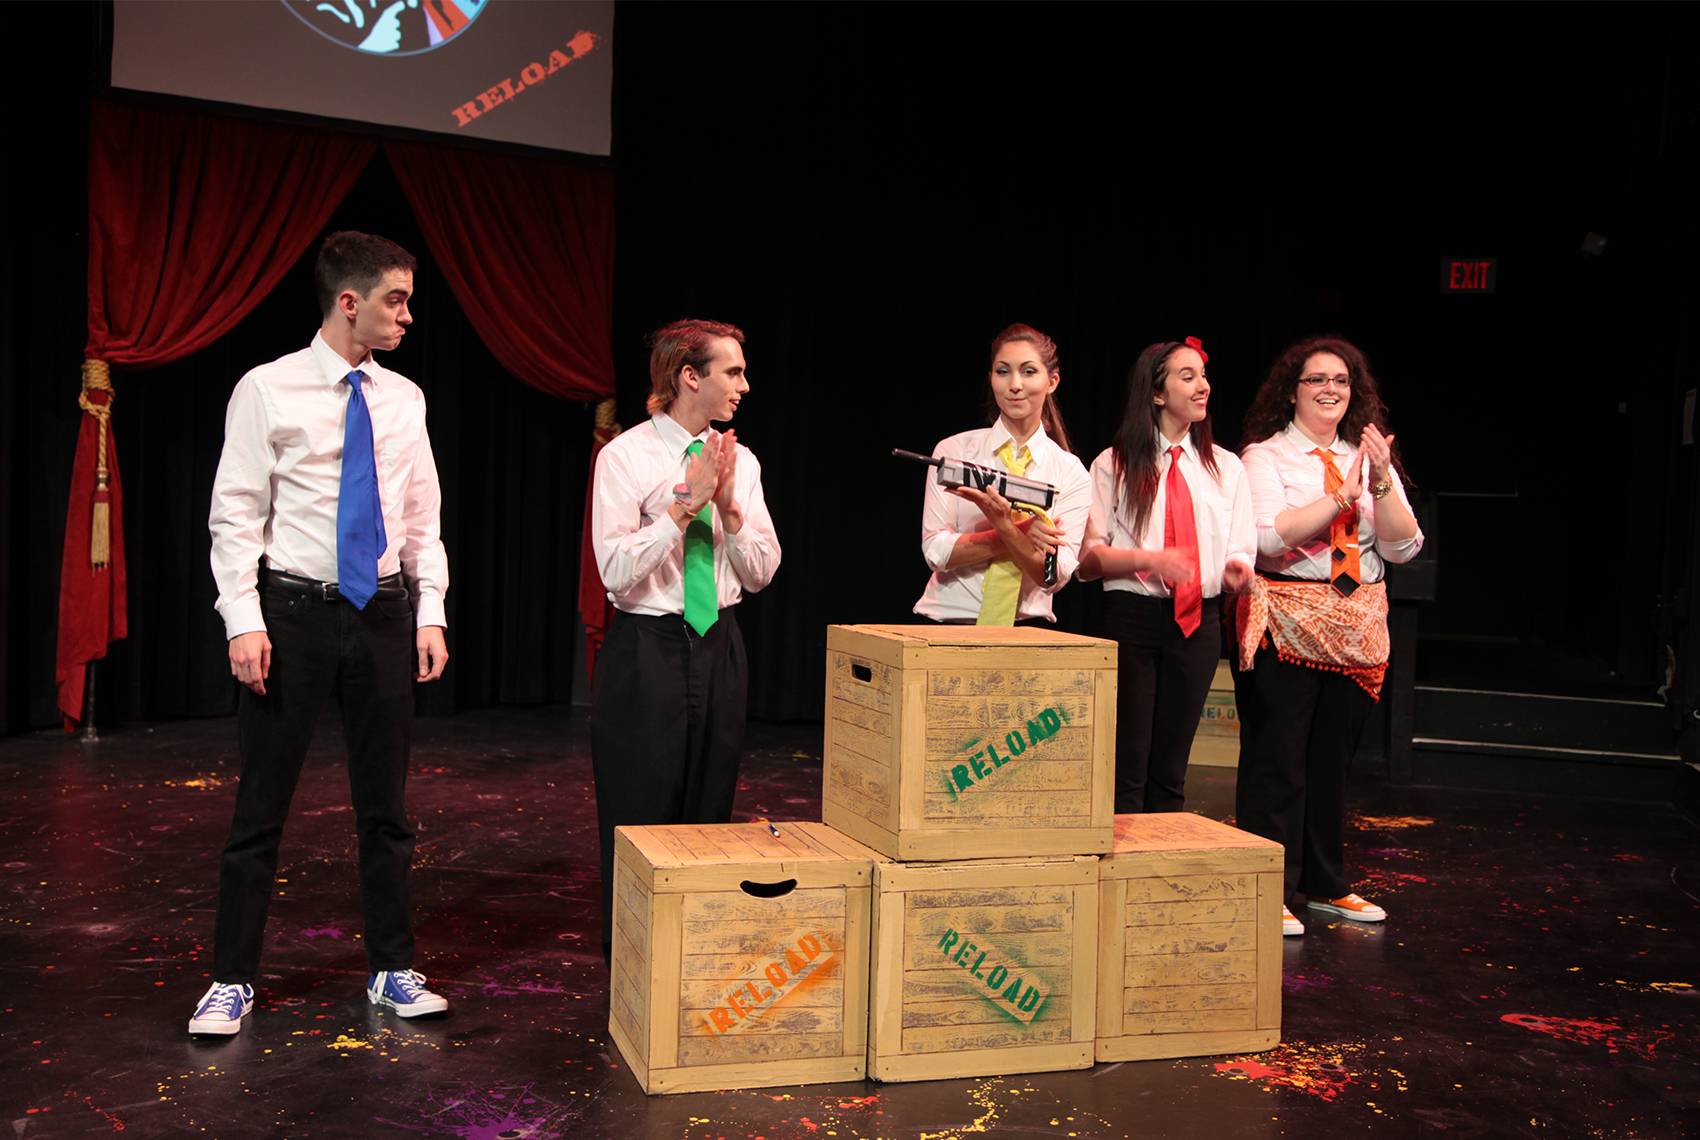 A group of young men and women stand behind some stacked wooden crates that read “RELOAD”. Each person is wearing a white button down with black slacks with a different colored tie ranging from blue (far right), green, yellow, red to orange (far left). A girl with a yellow tie (middle) holds up a makeshift weapon. 